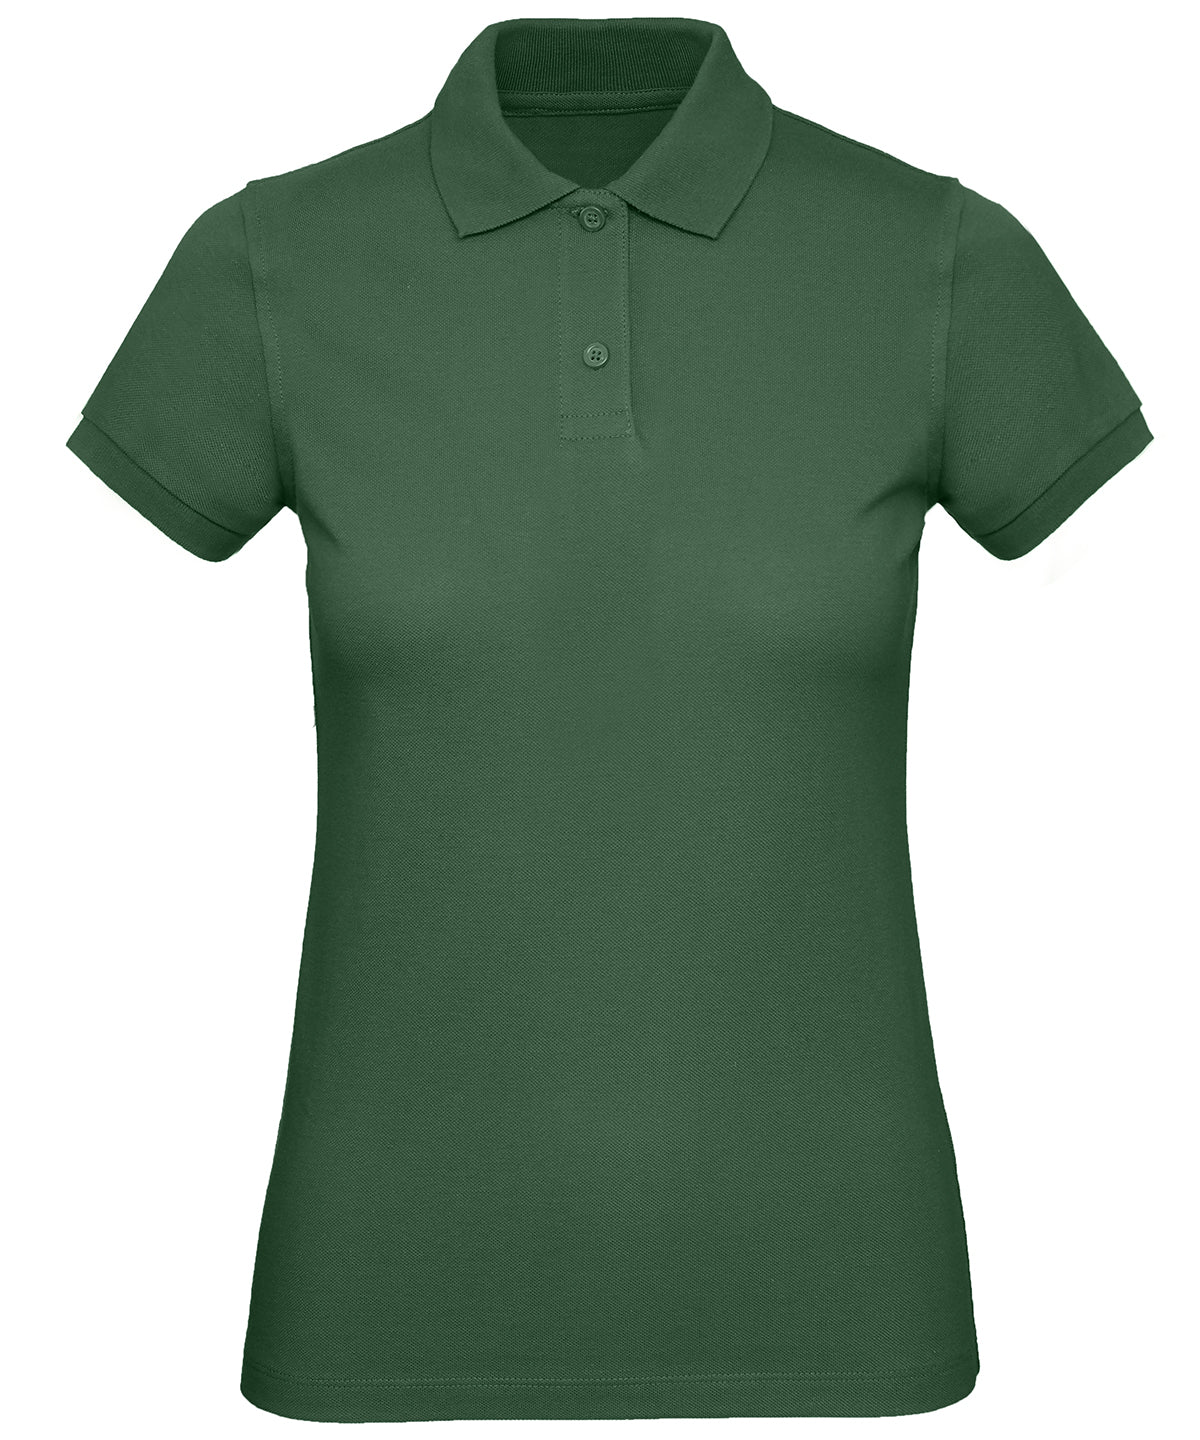 Personalised Polo Shirts - Black B&C Collection B&C Inspire Polo /women